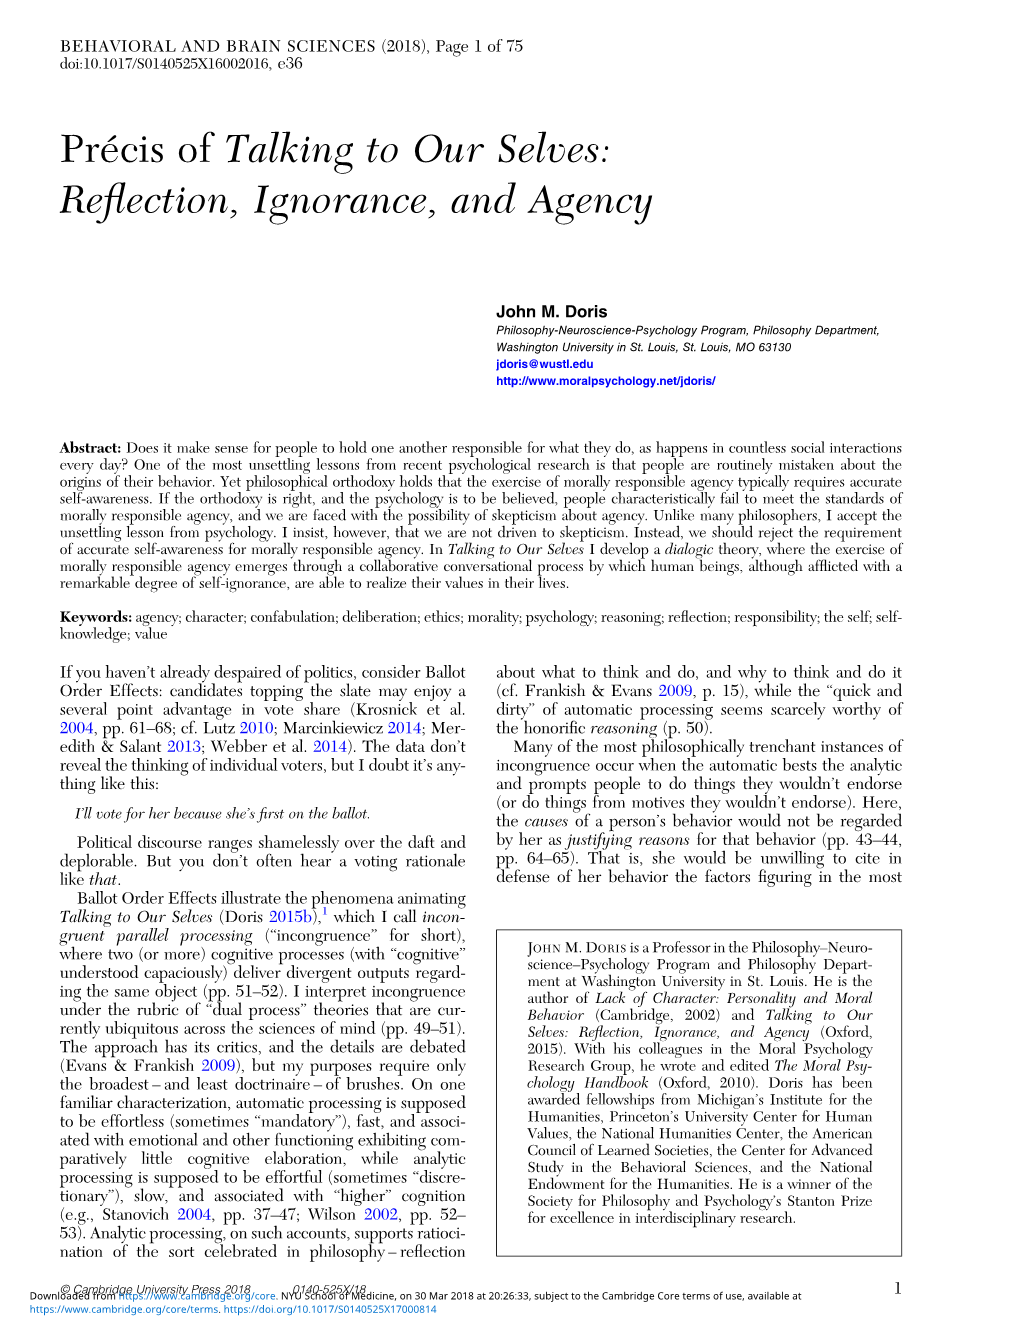 Précis of Talking to Our Selves: Reflection, Ignorance, and Agency